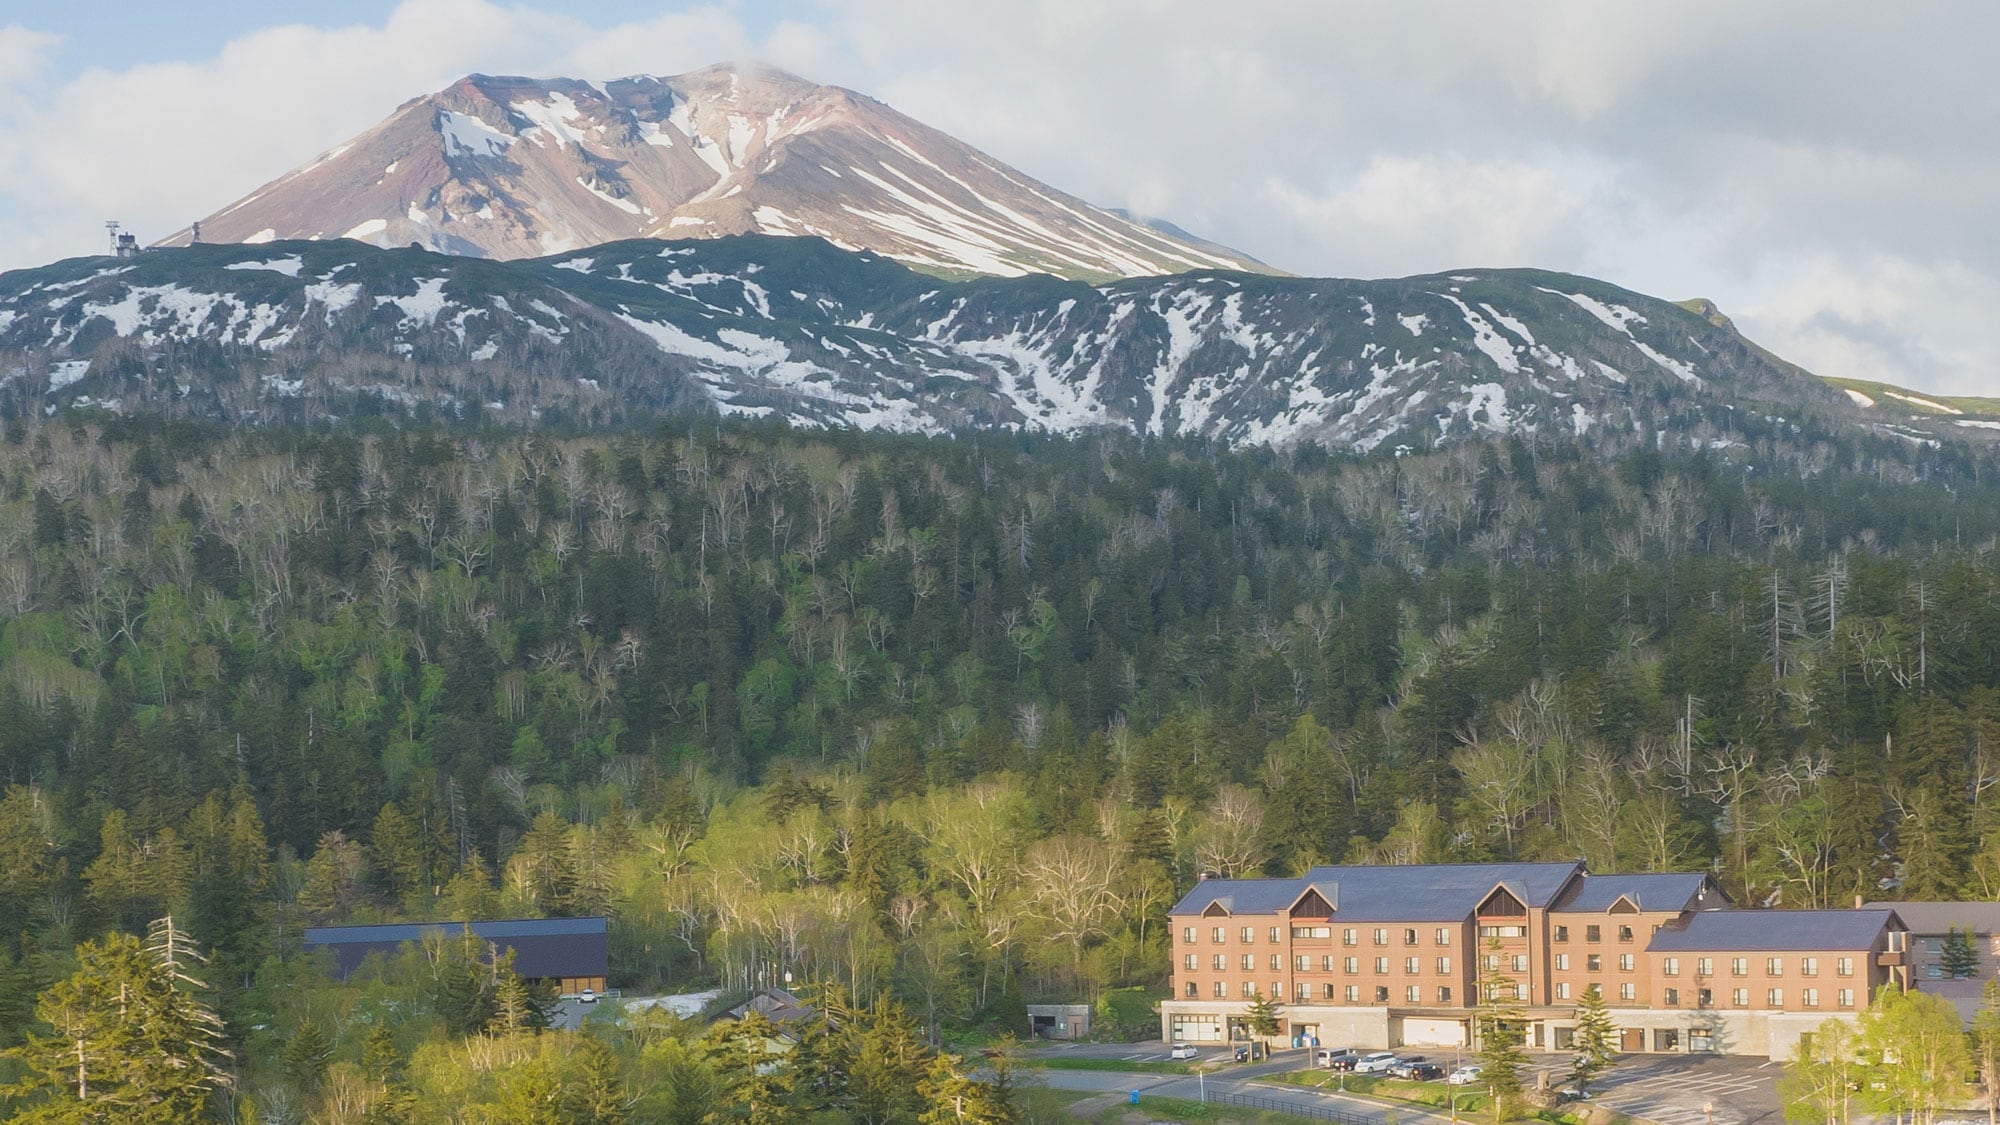 Hotel Bearmonte at an altitude of 1,100m, surrounded by the mountain bosom of Mt. Asahidake, the highest peak in Hokkaido.